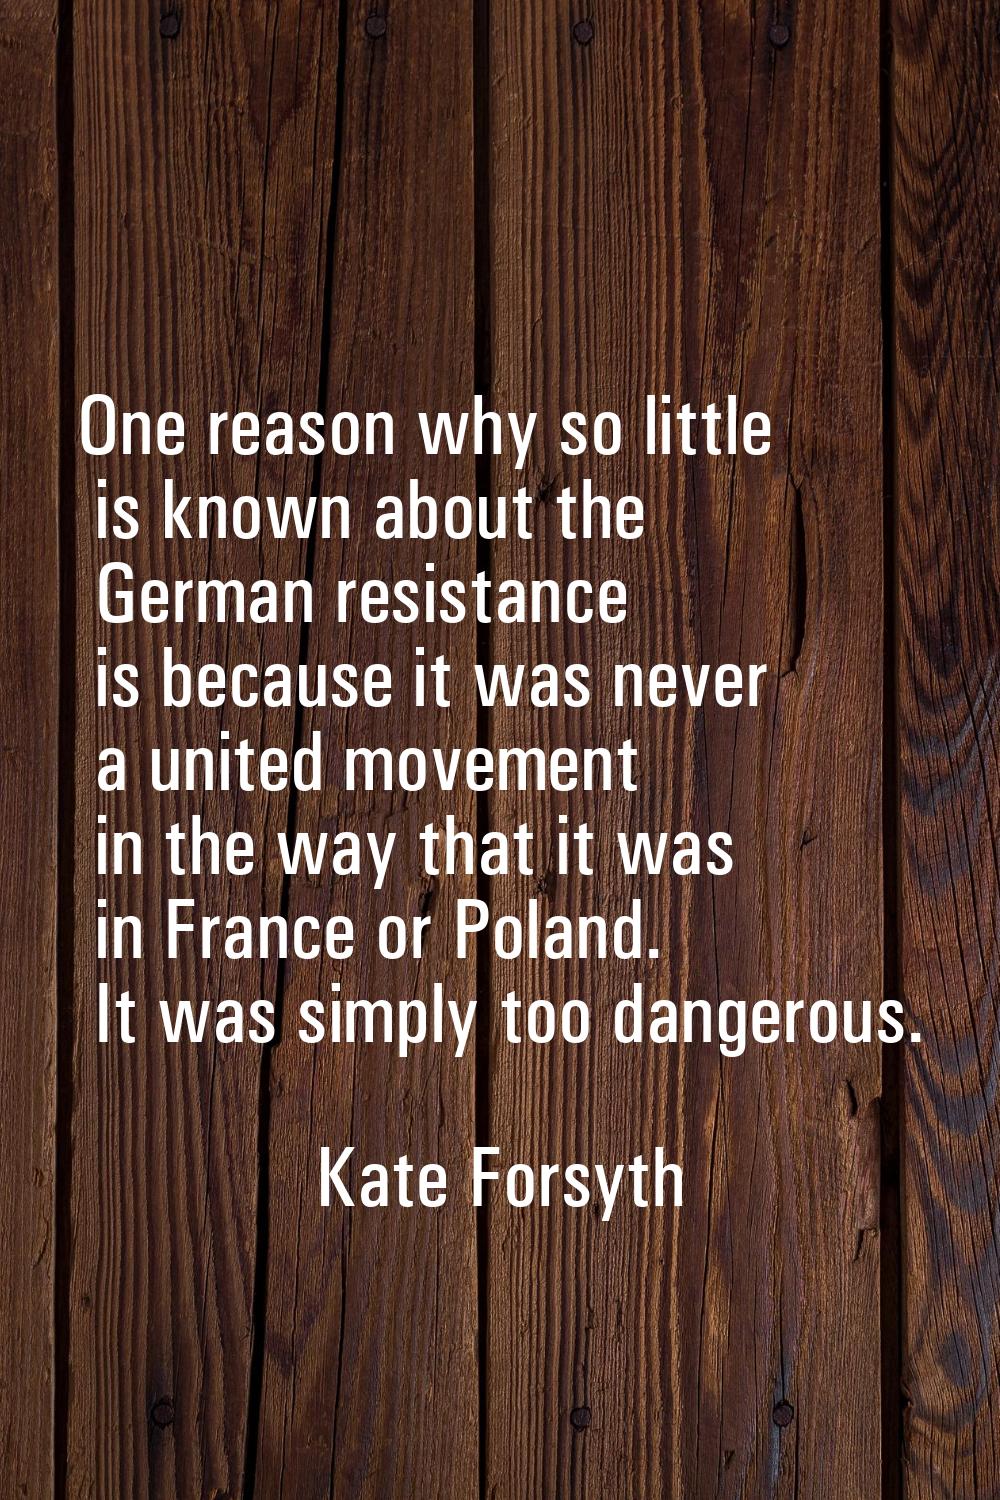 One reason why so little is known about the German resistance is because it was never a united move